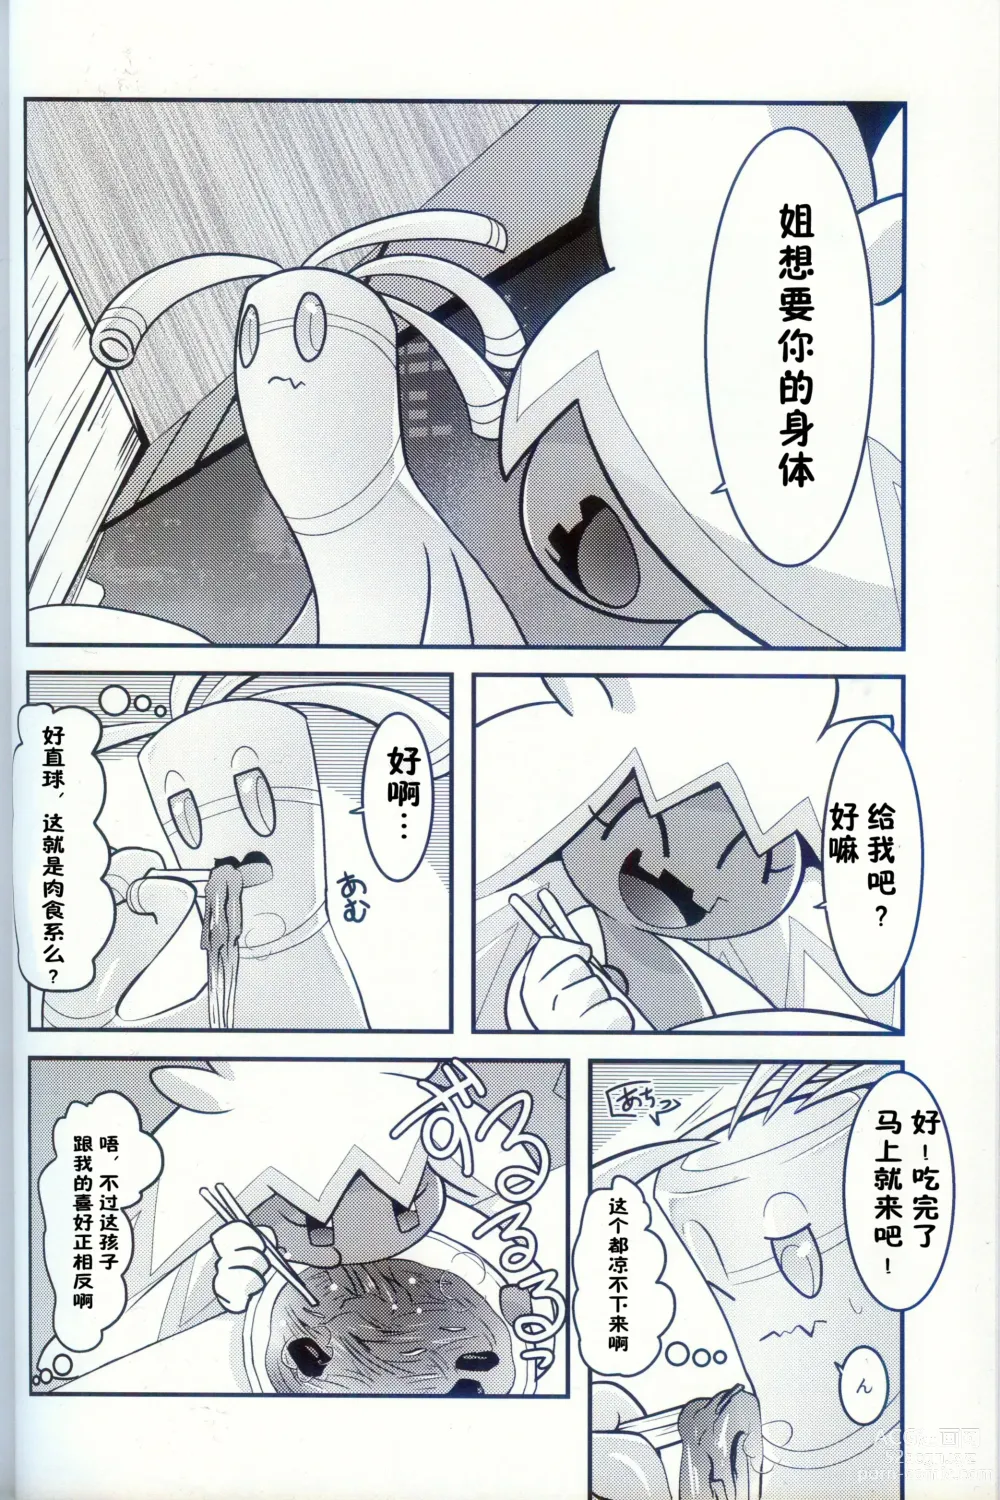 Page 7 of doujinshi 横滨的塞富豪巨锻匠